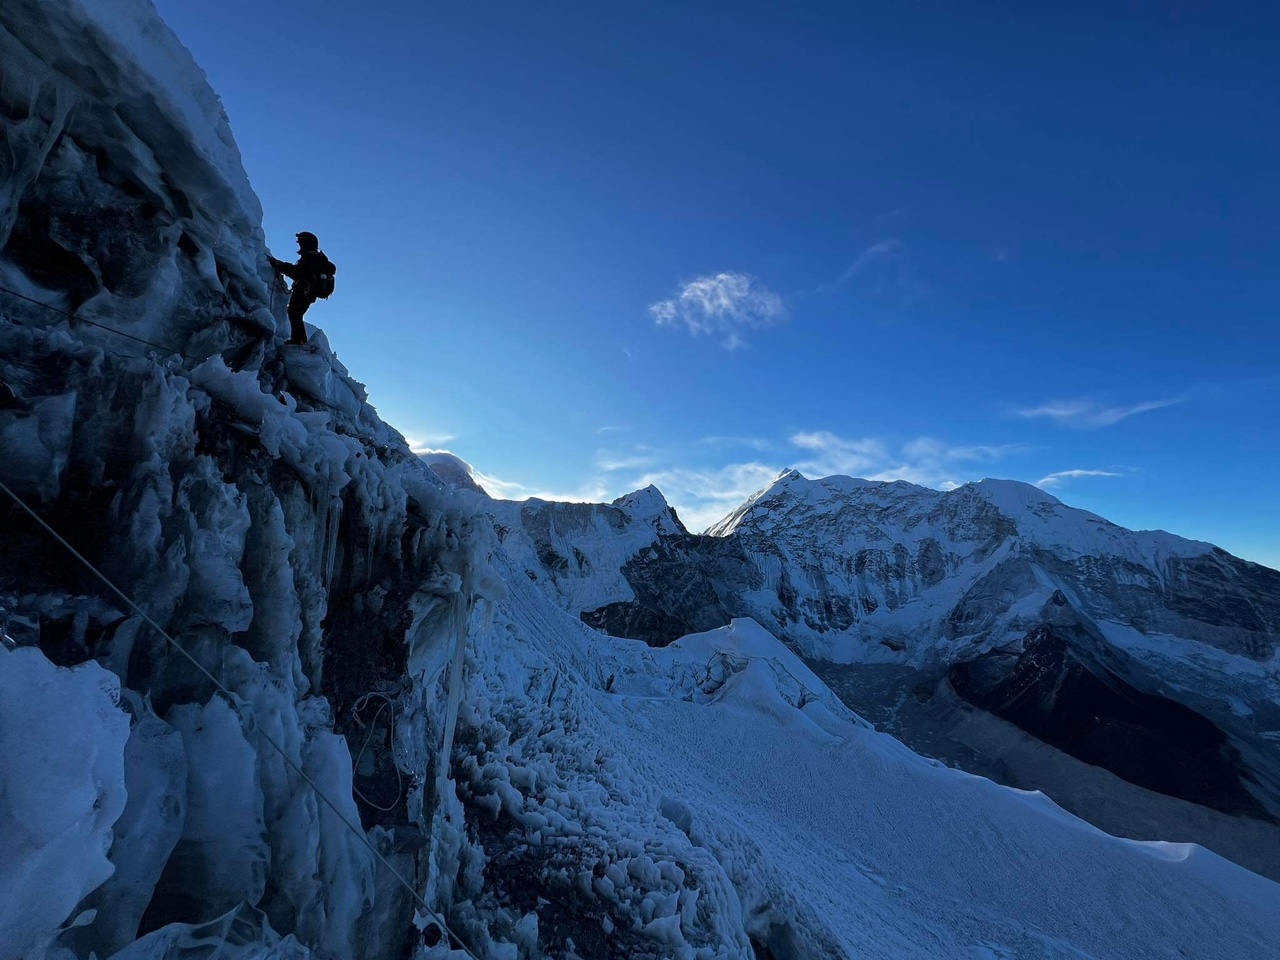 Island Peak: A Mountaineer's Dilemma in a Changing Climate